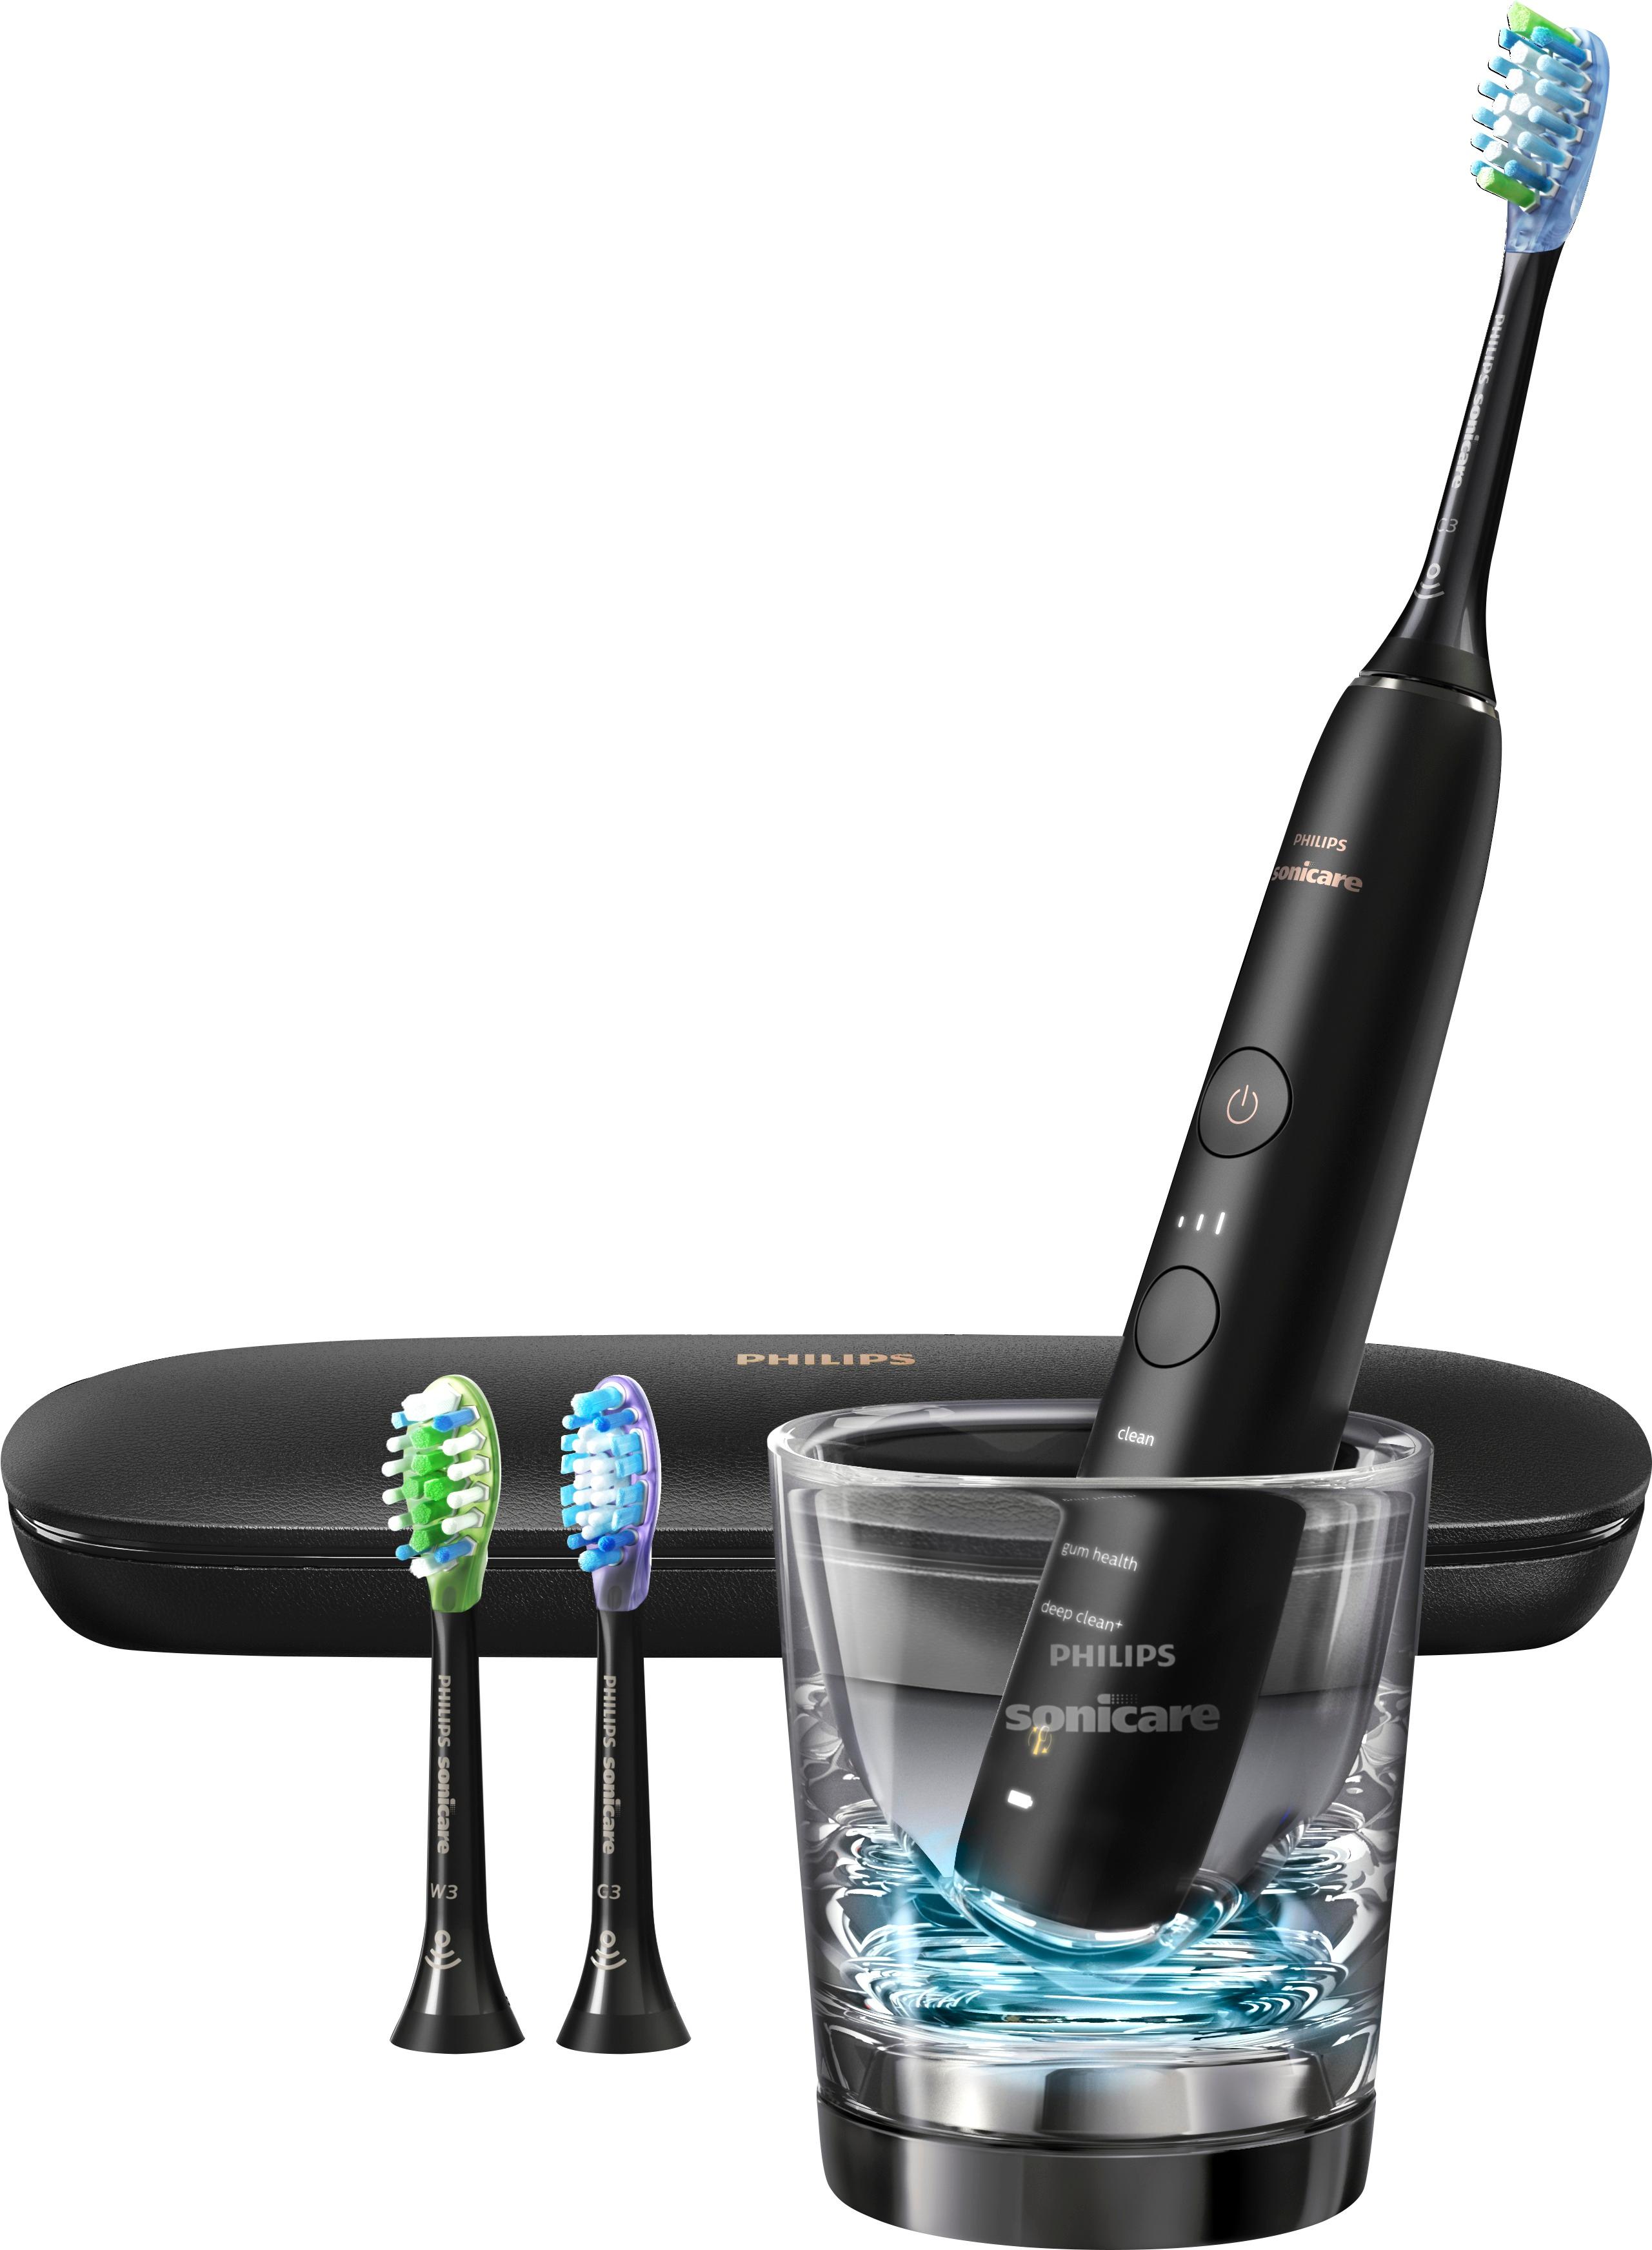 Philips Sonicare Diamondclean Smart Electric Rechargeable Toothbrush 